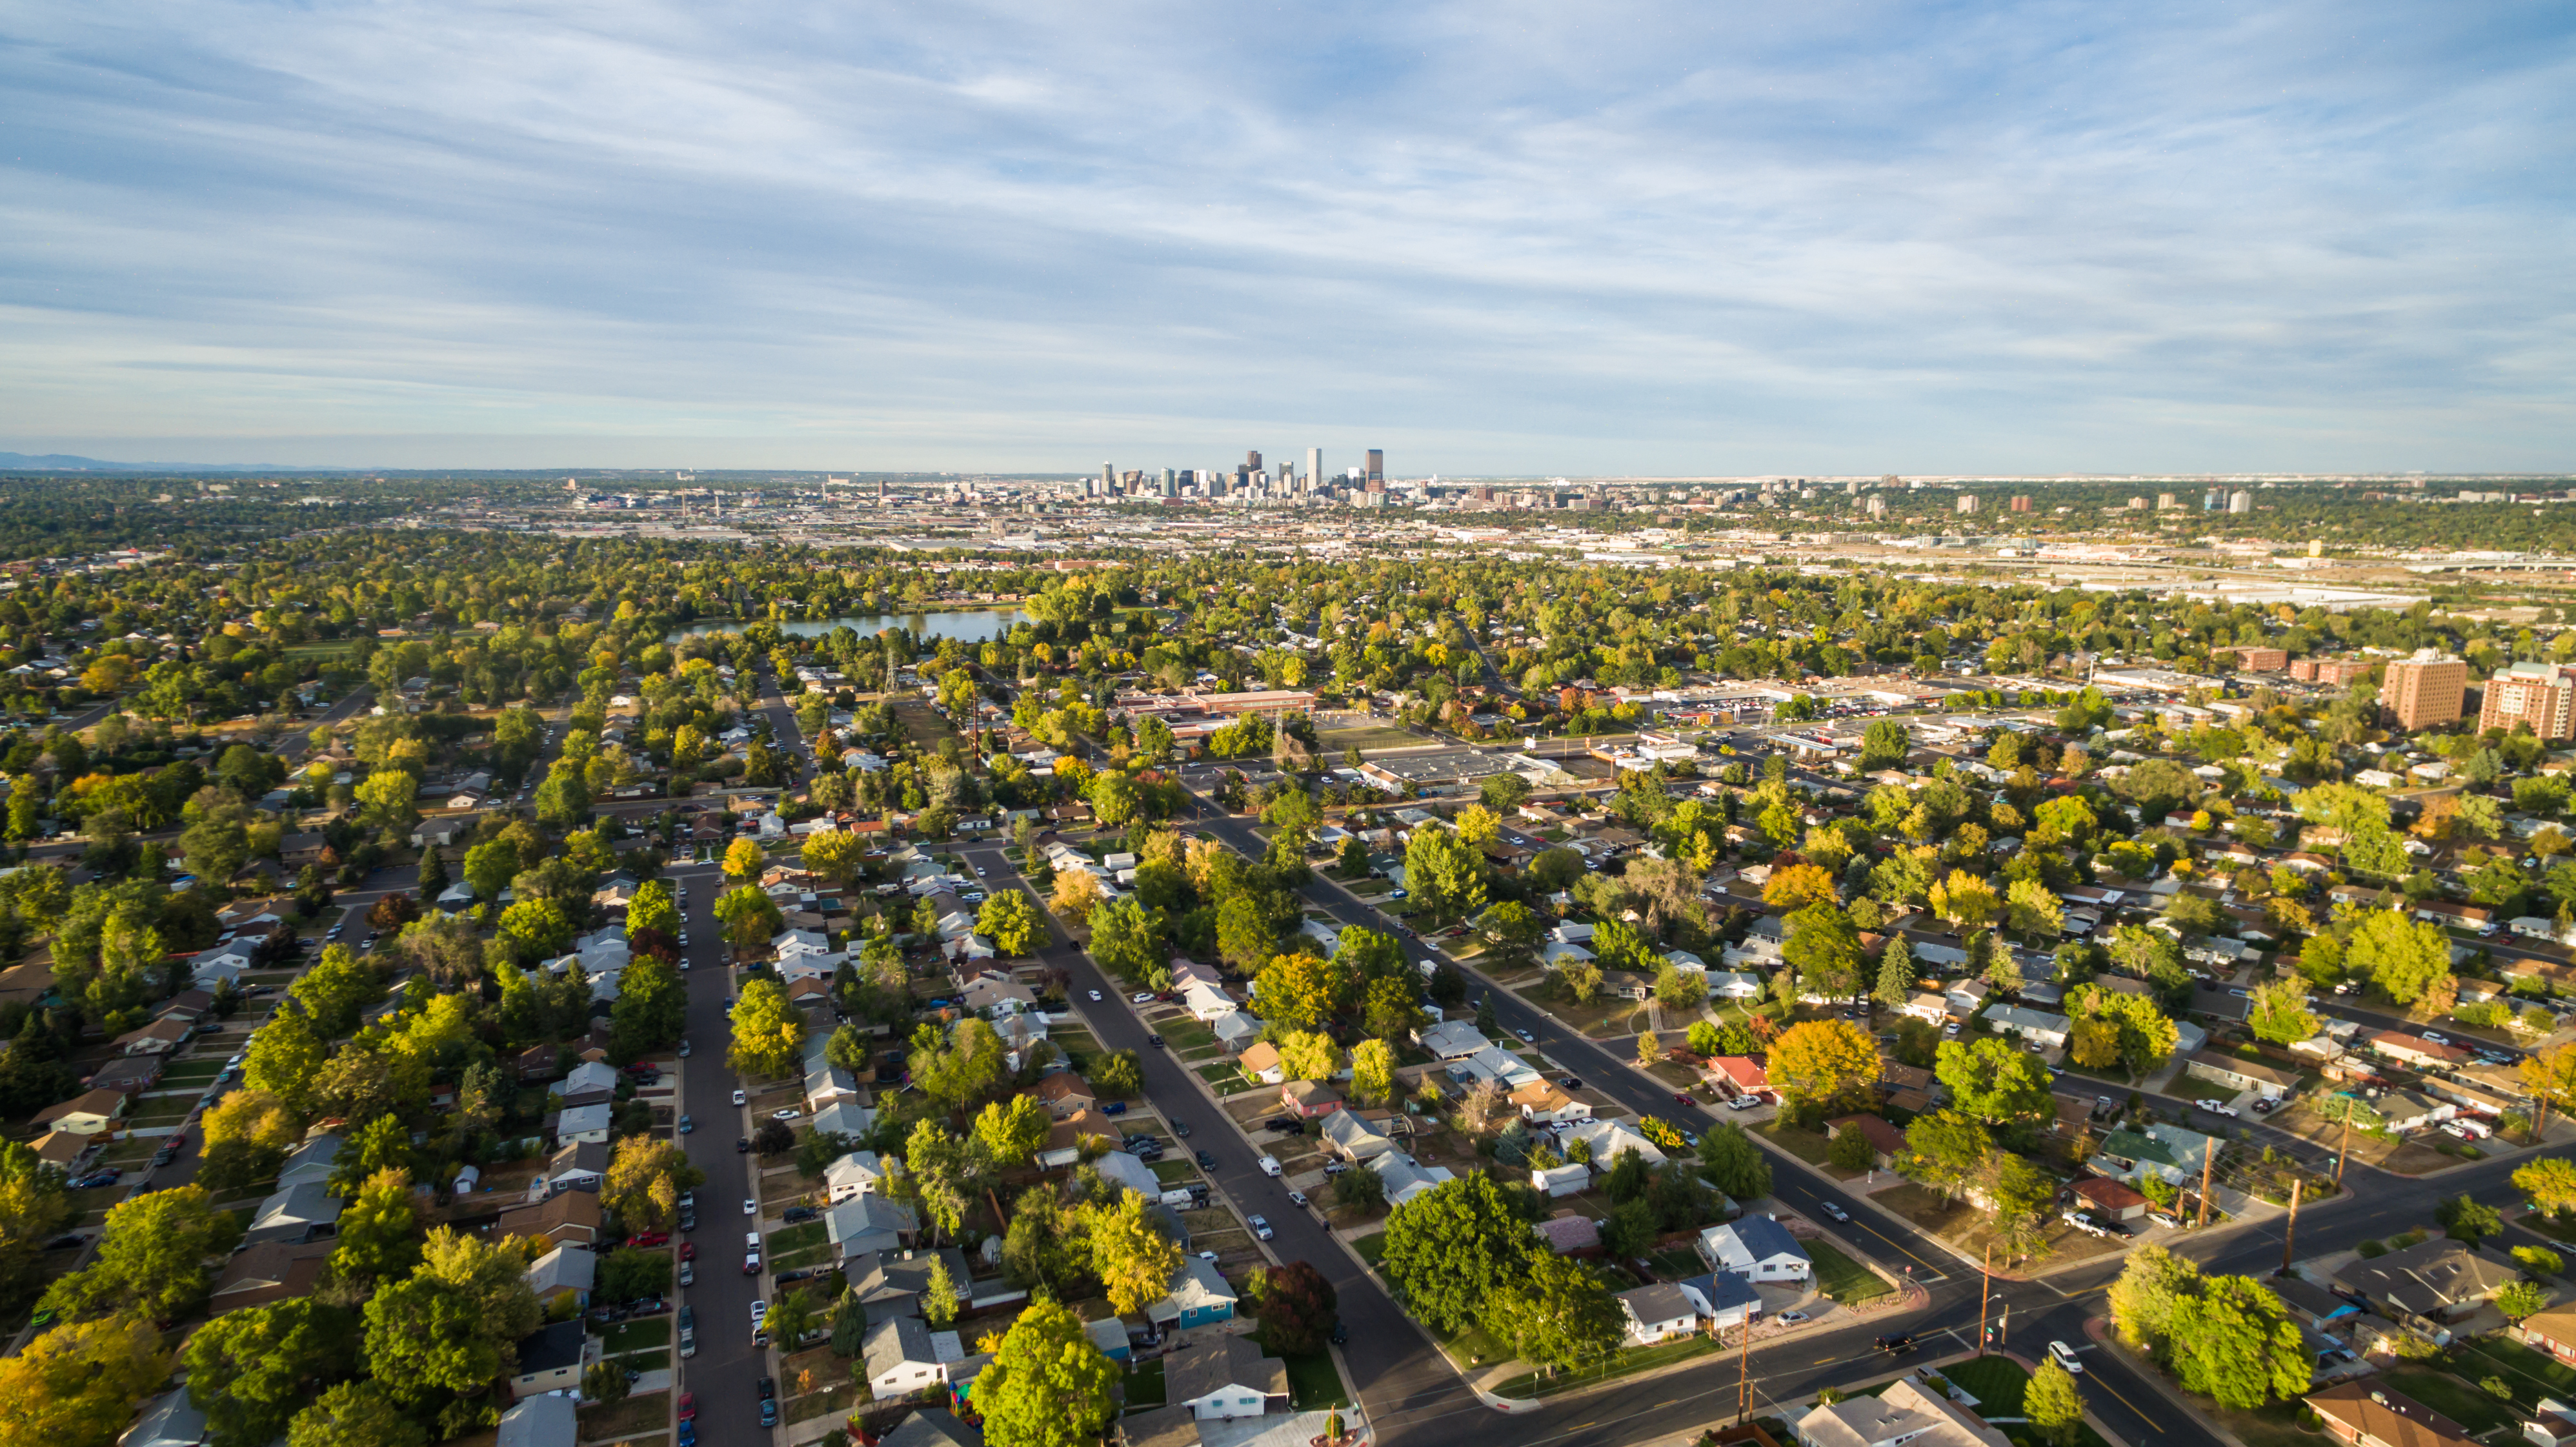 Aerial view of residential neighborhood with view of downtown Denver.